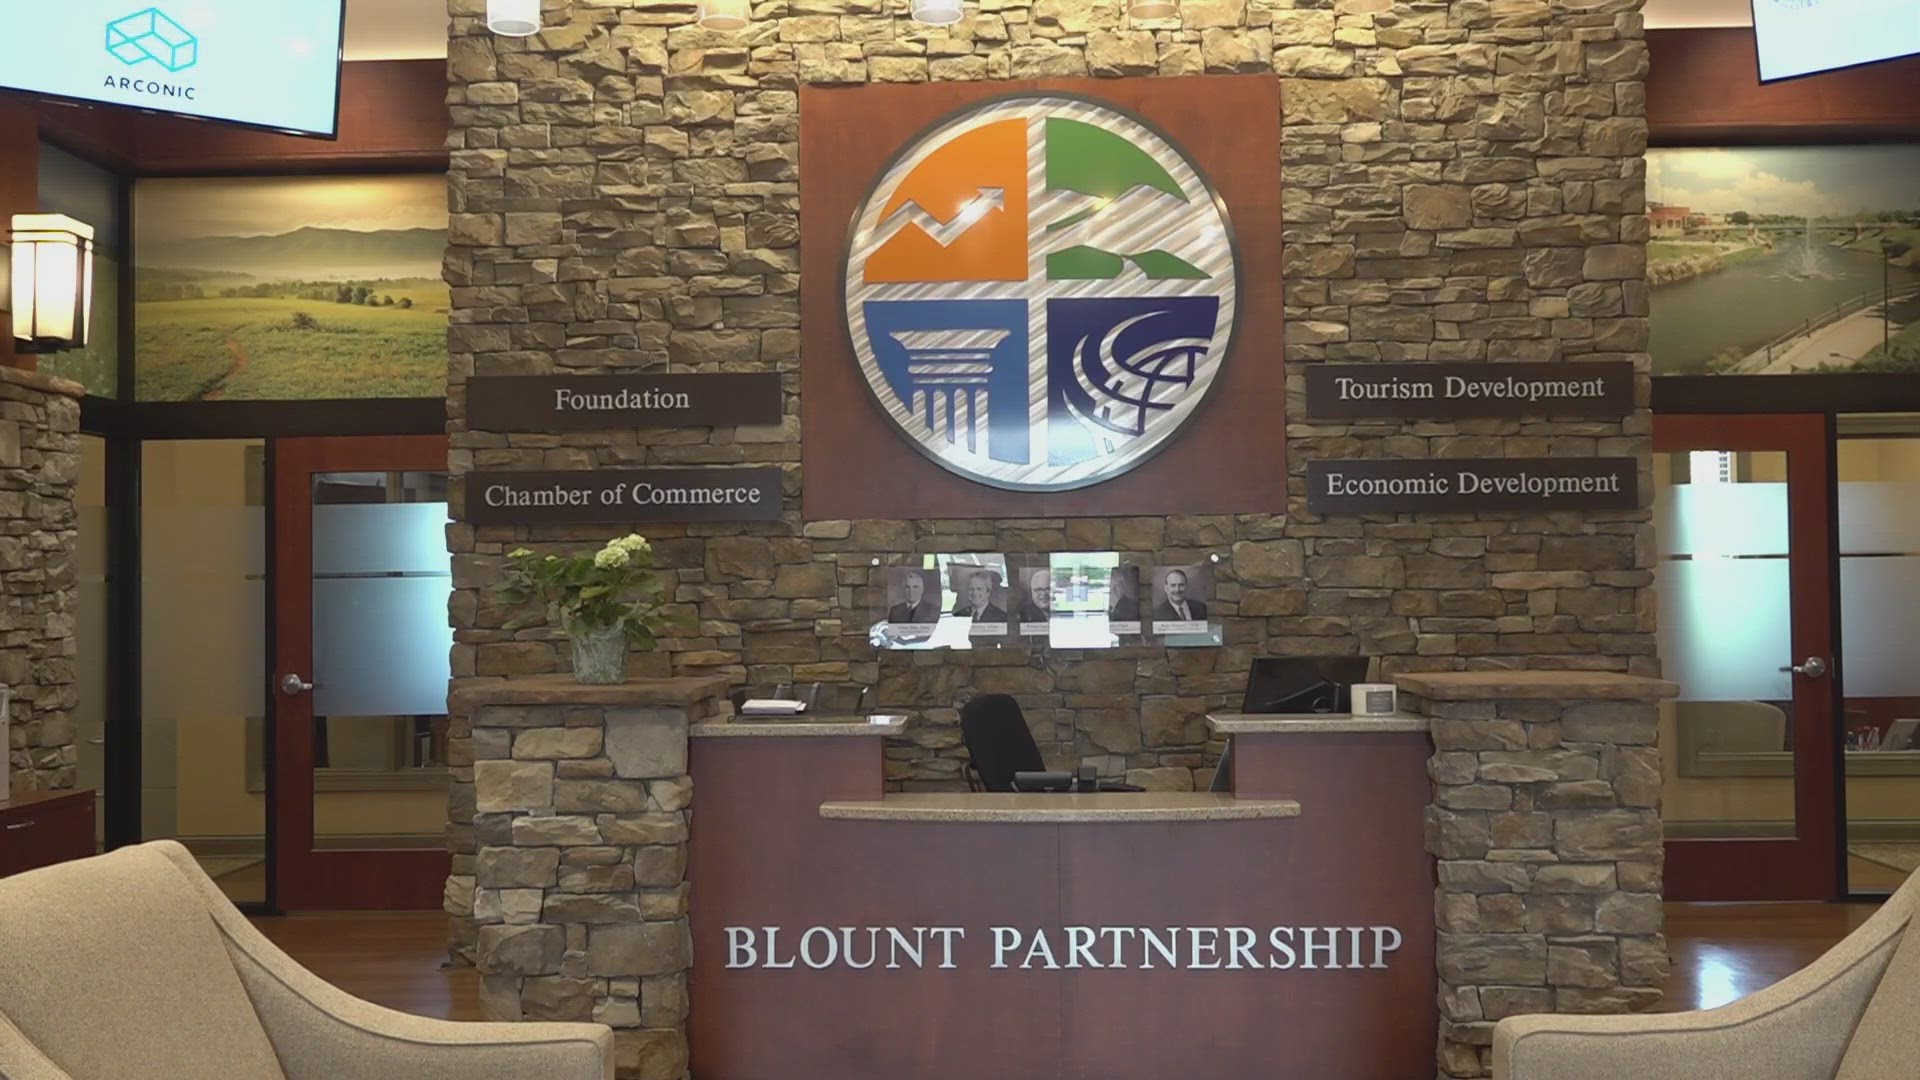 Blount County Partnerships is making an effort to meet students and provide career opportunities in the county.